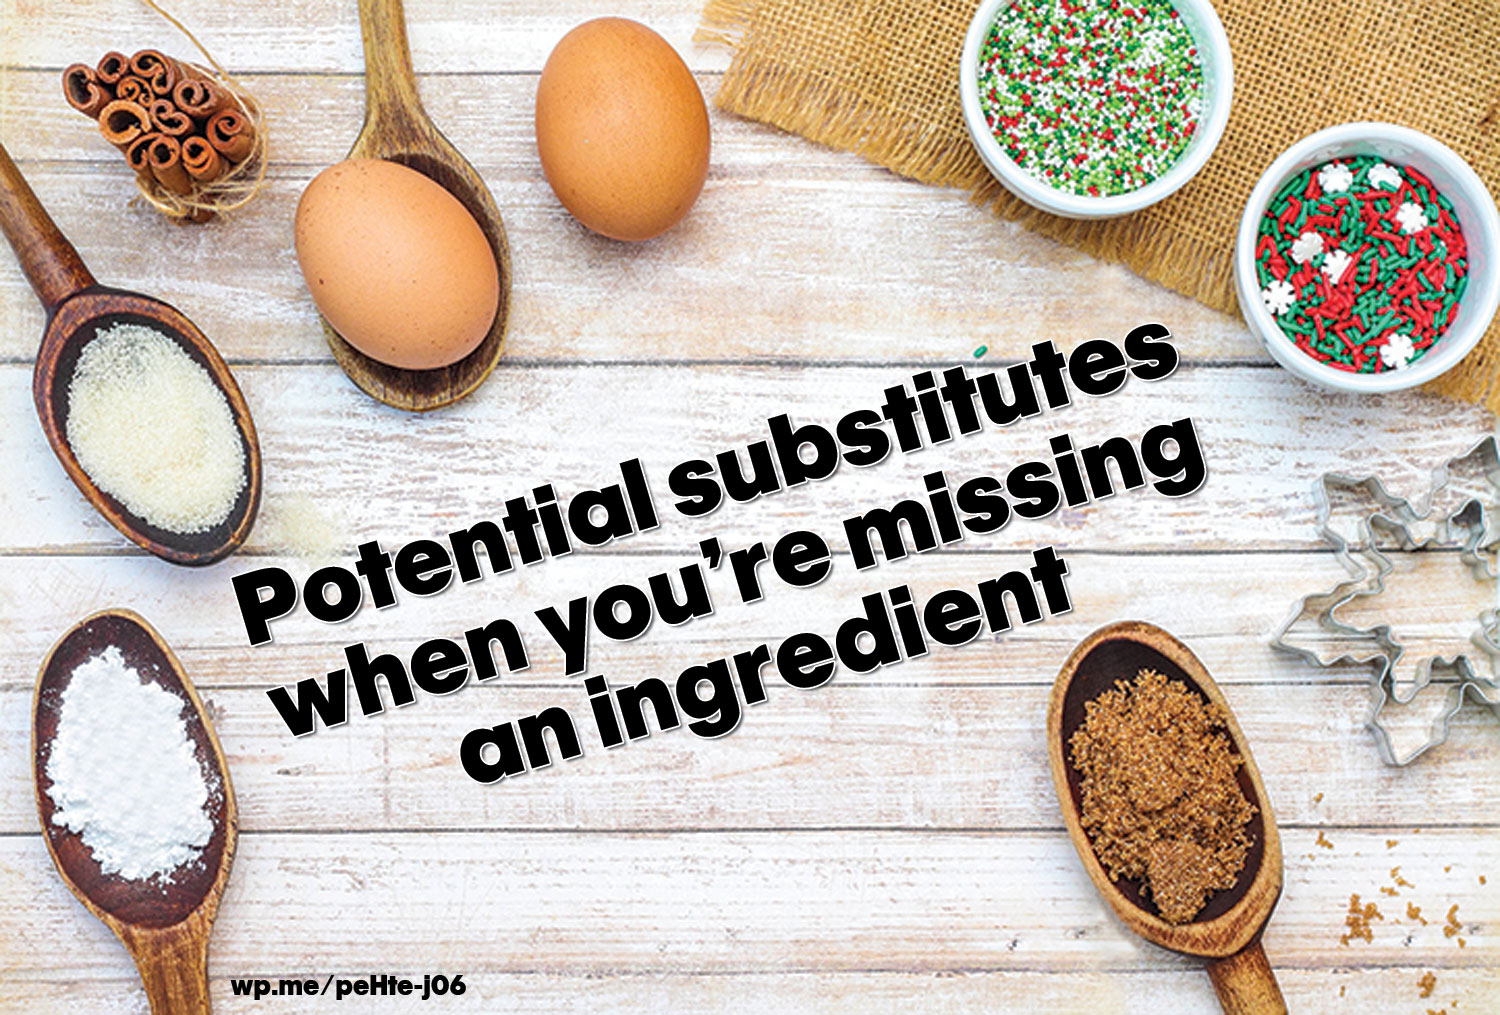 Potential substitutes when you're missing an ingredient - The following substitution guide, courtesy of AllRecipes.com, can help cooks overcome the last-minute surprises regarding missing ingredients.